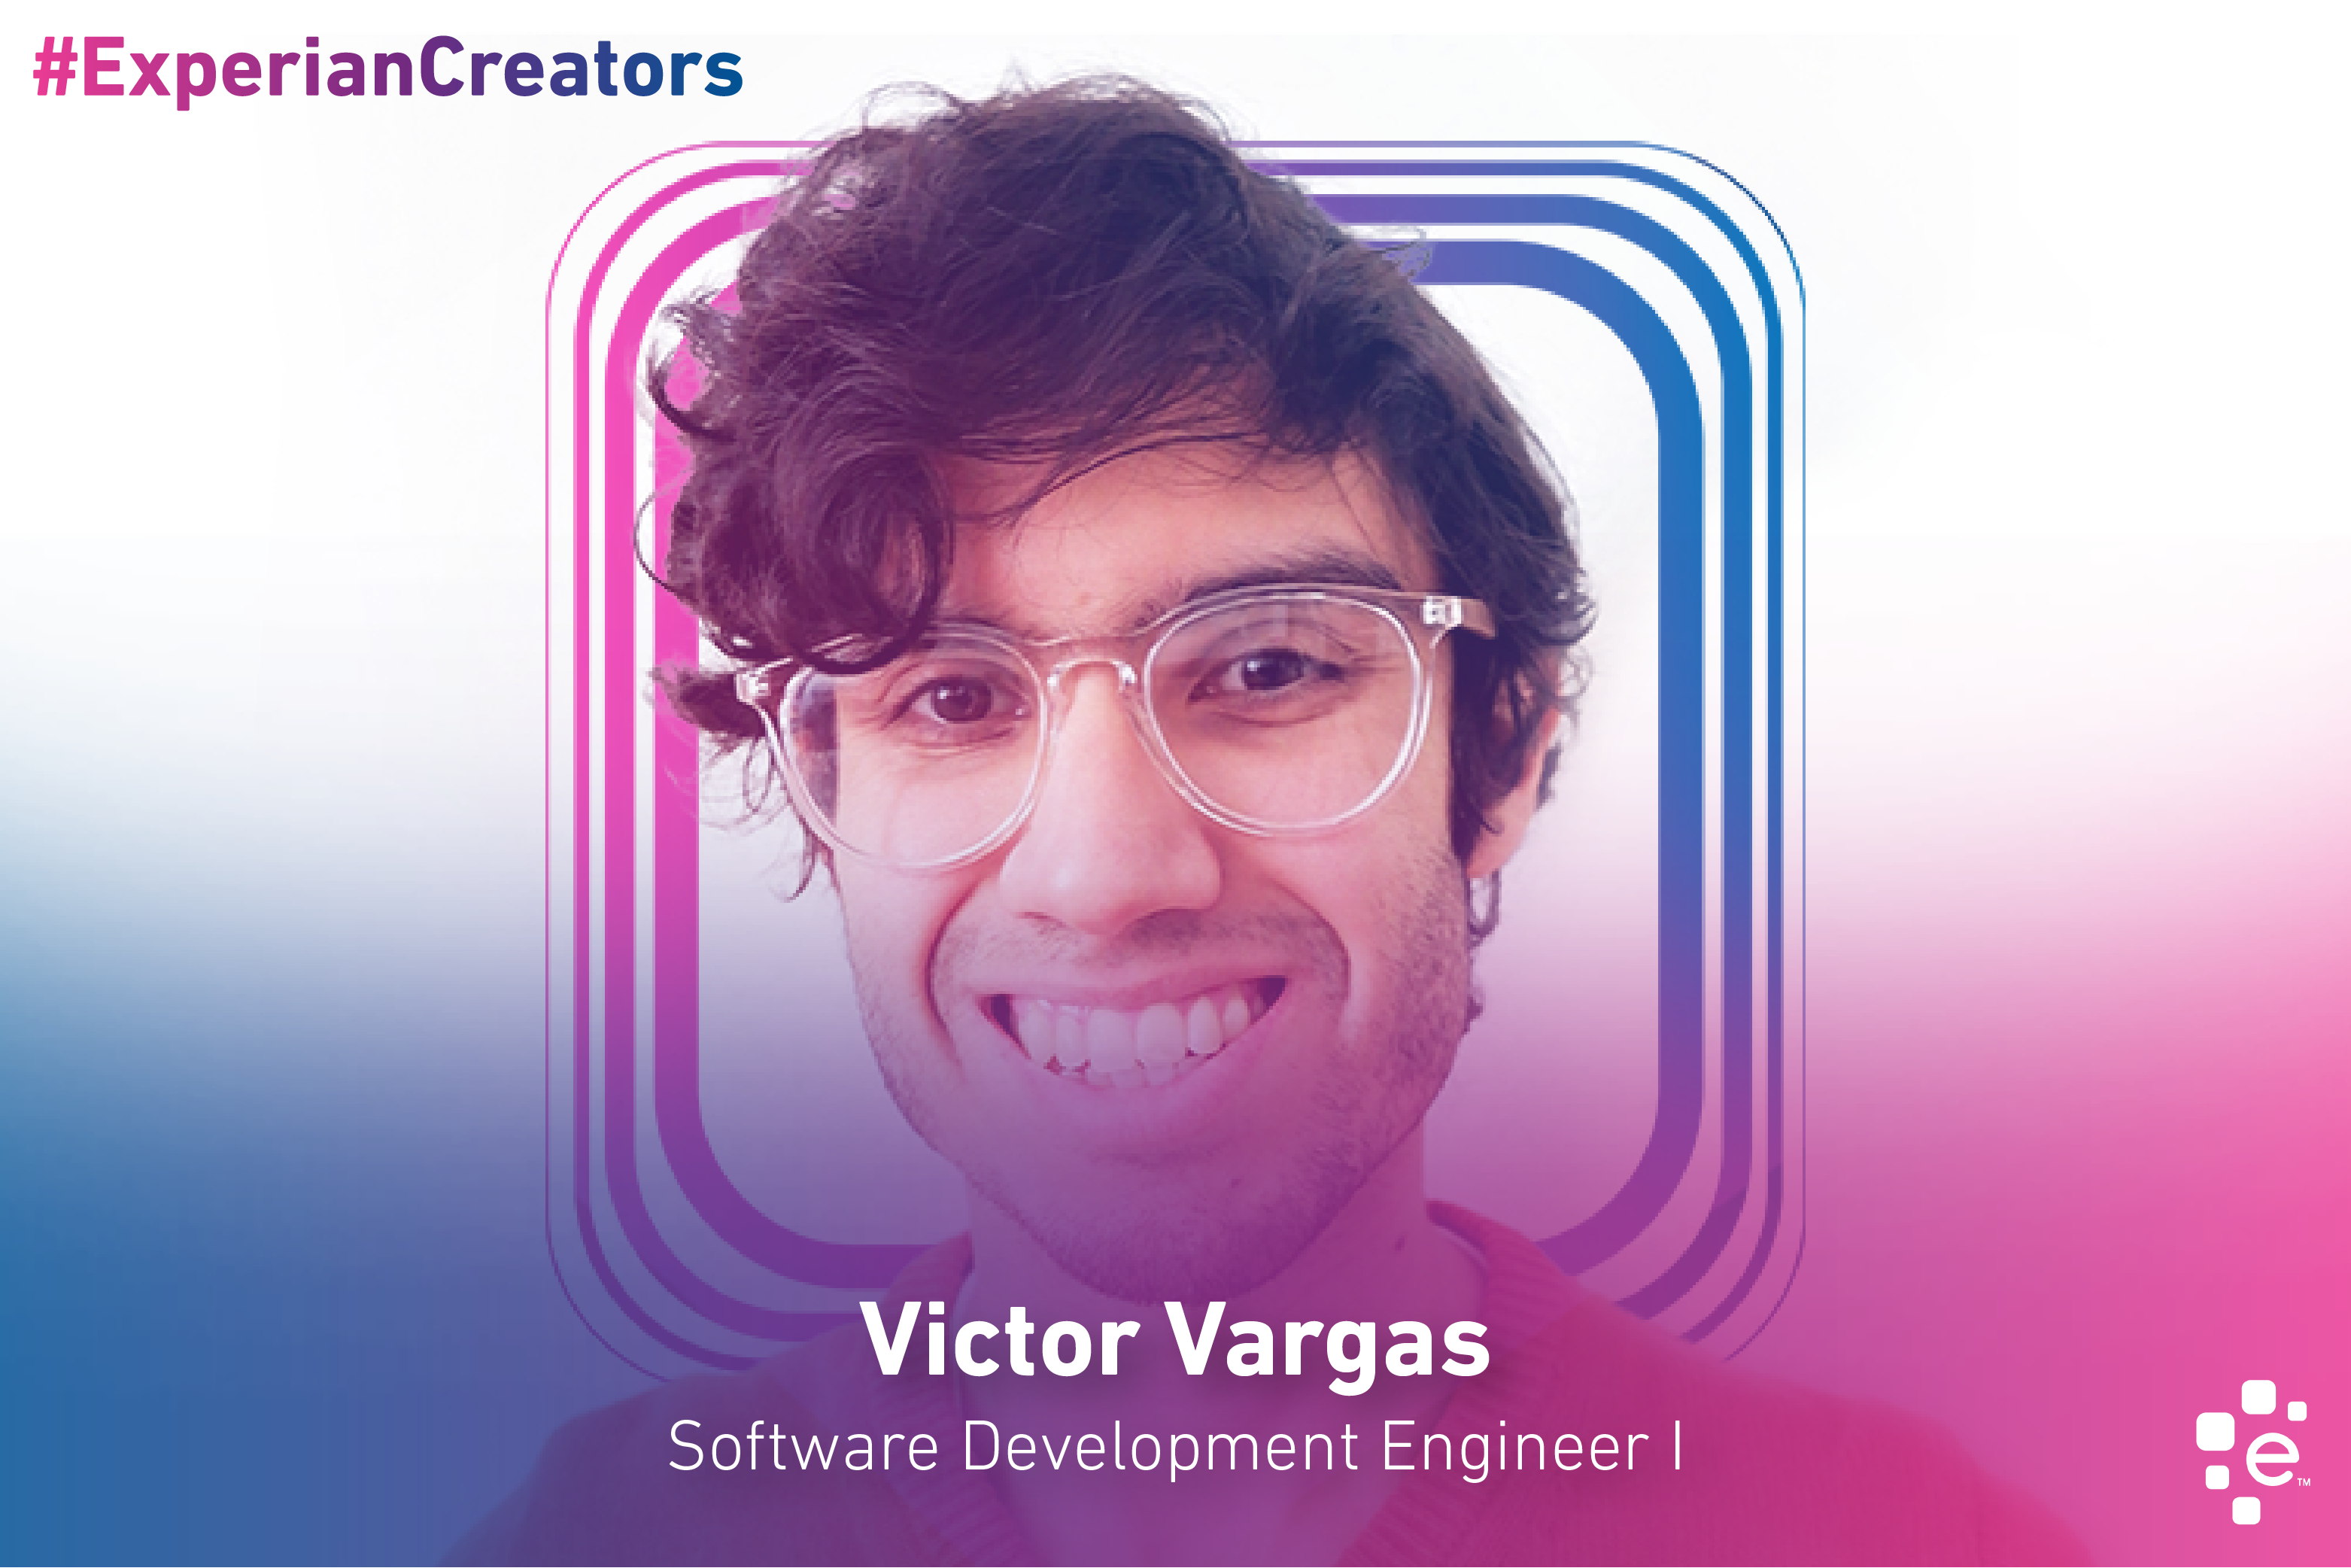 An image of Victor Vargas, a participant in the Engineer Accelerator Program. He is now a Software Development Engineer.